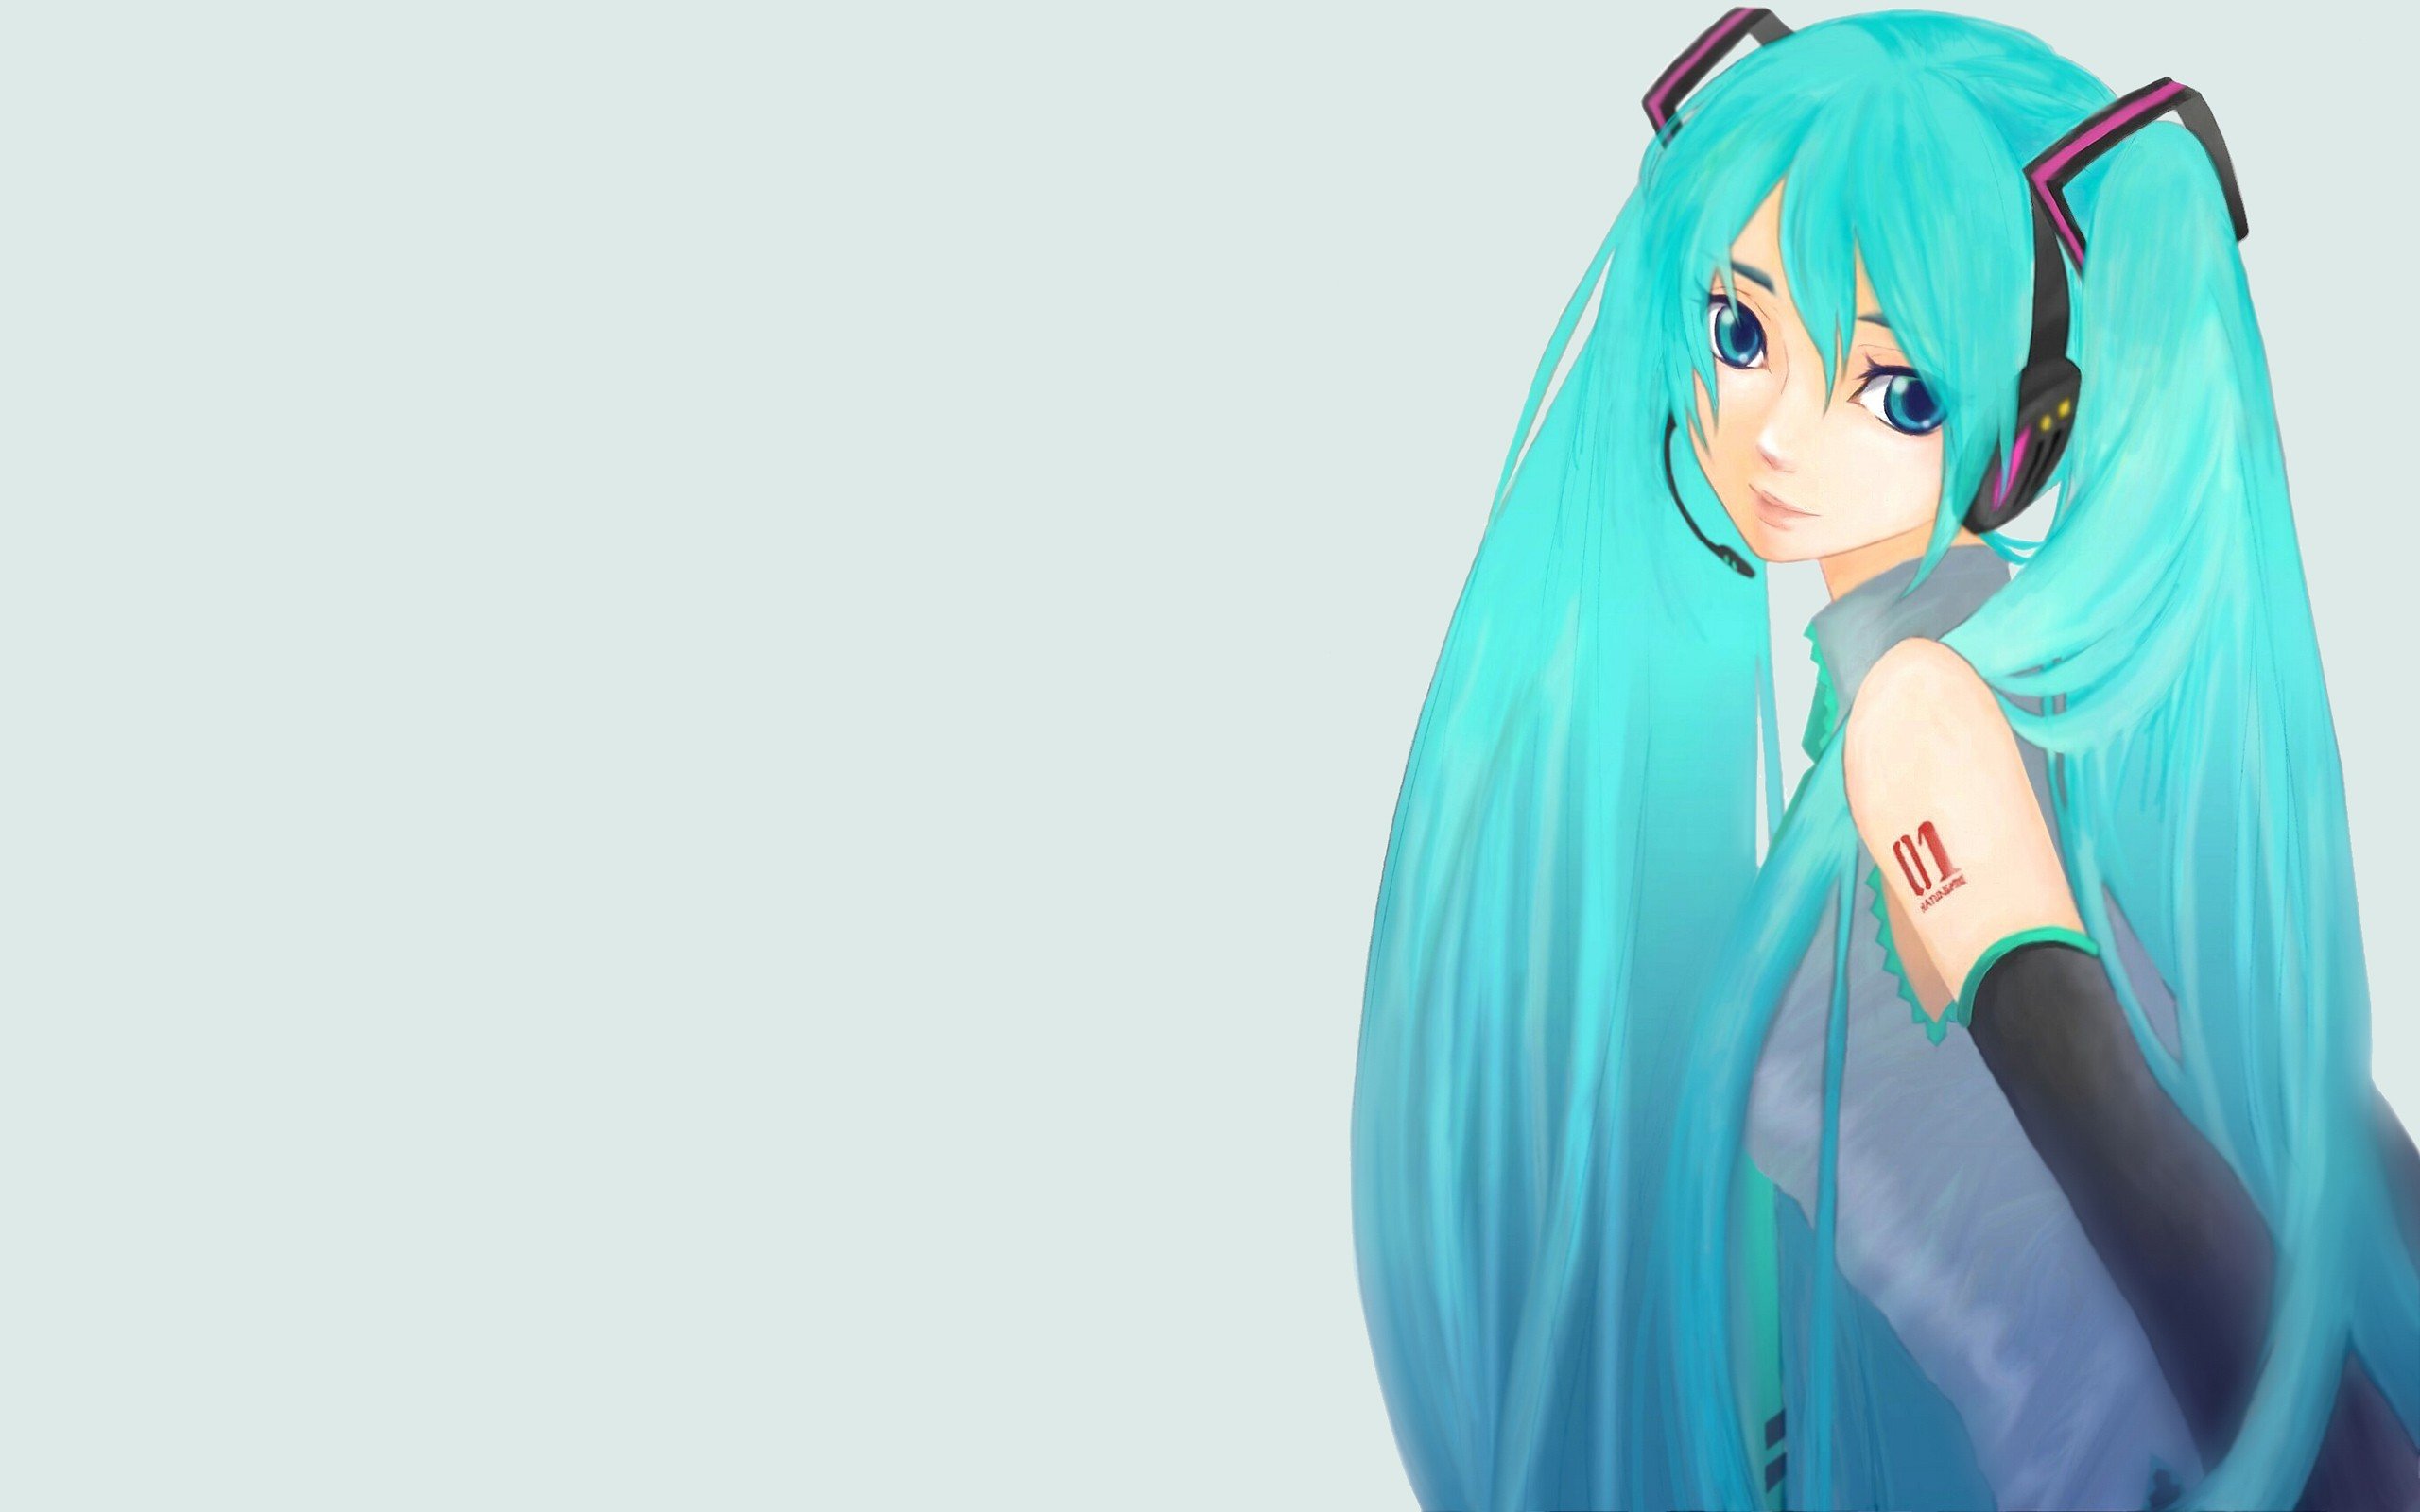 headphones, Tattoos, Vocaloid, Hatsune, Miku, Blue, Eyes, Tie, Long, Hair, Blue, Hair, Twintails, Smiling, Shirts, Simple, Background, Anime, Girls, Microphones Wallpaper